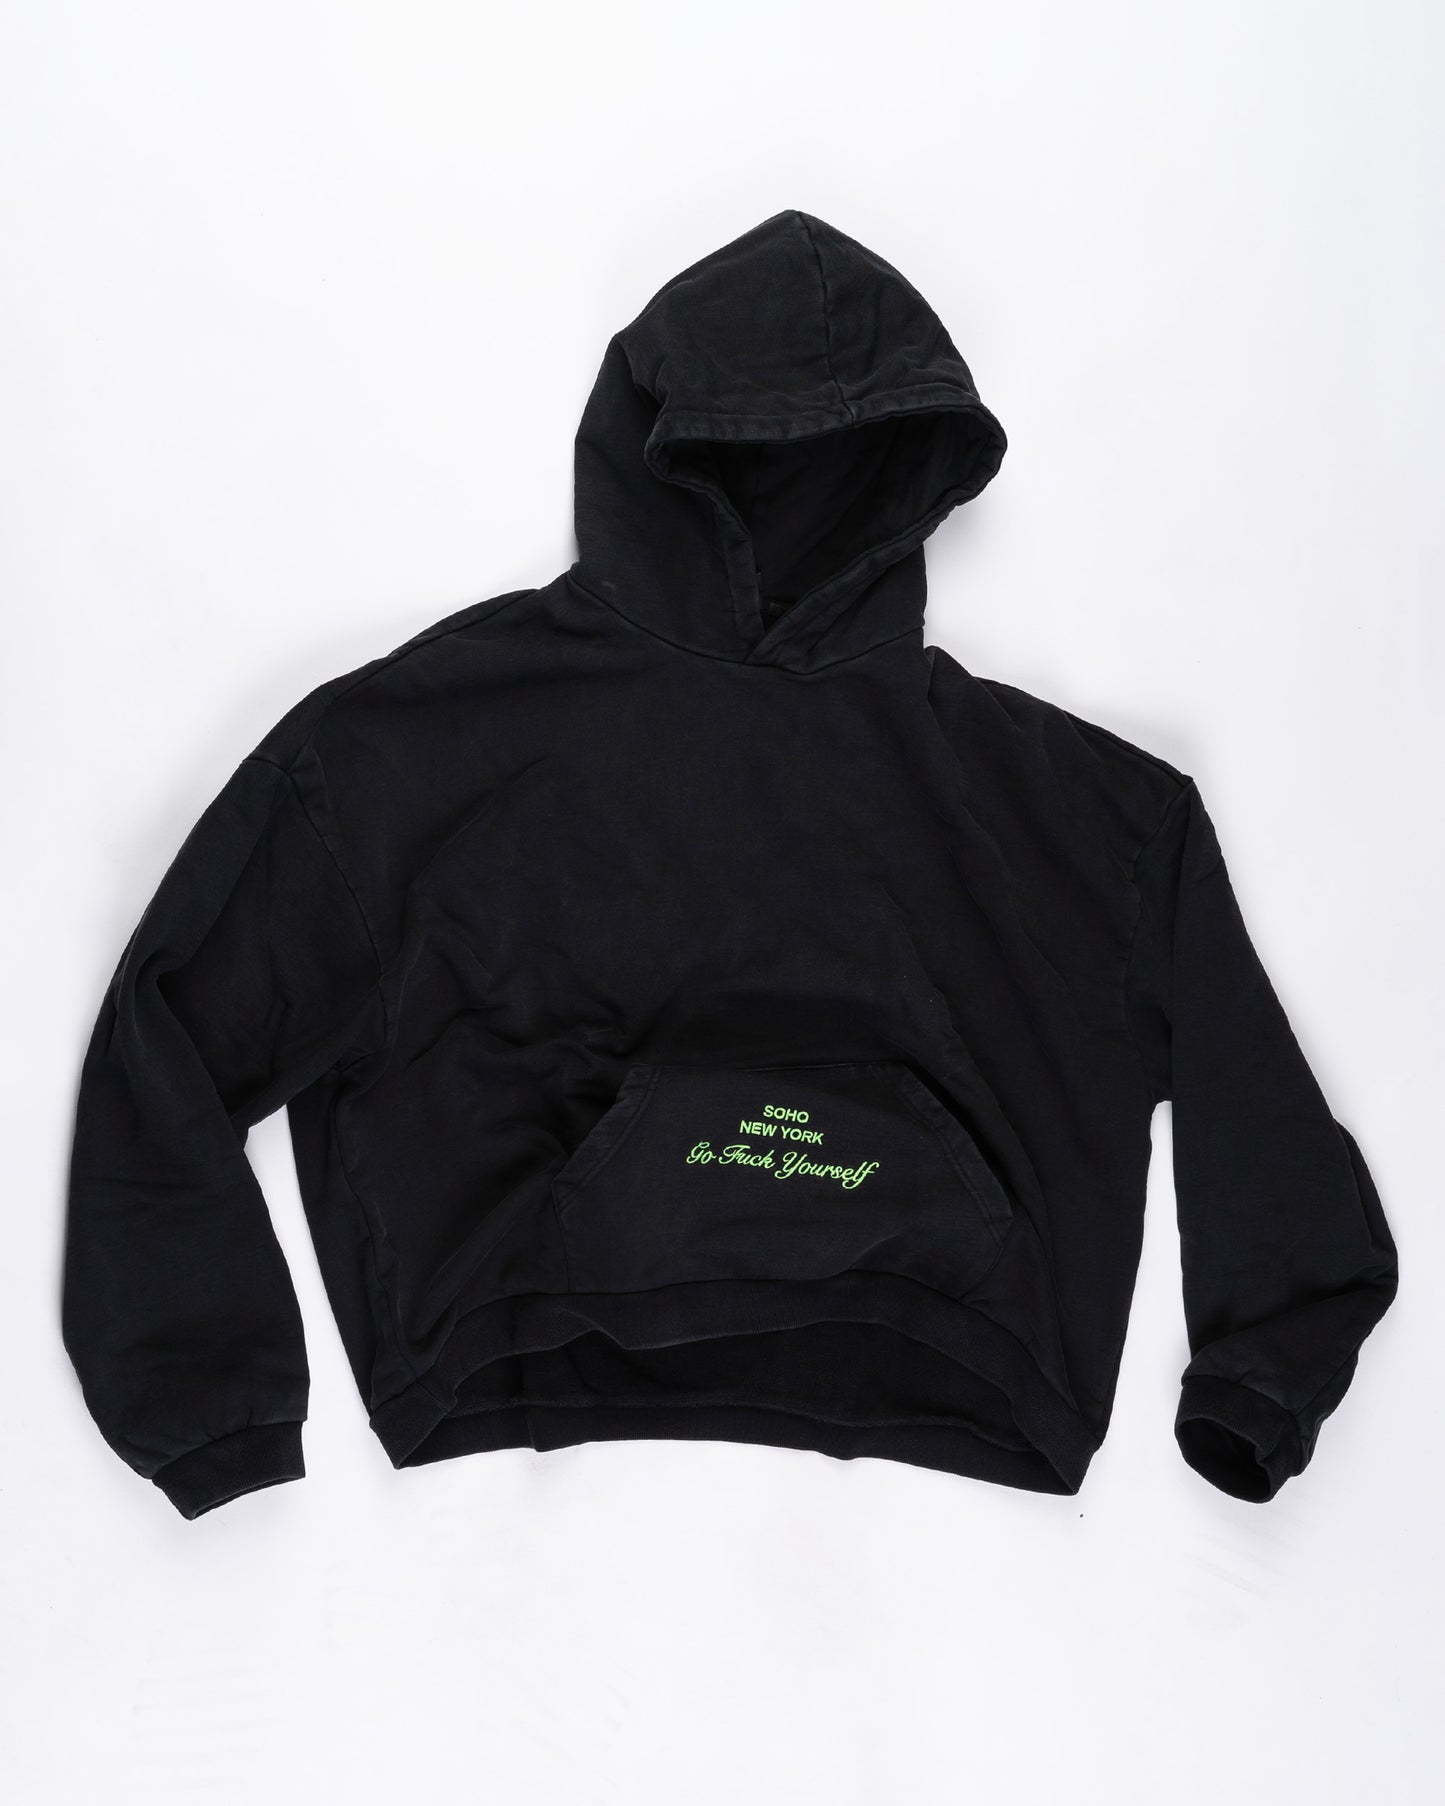 Black Embroidered 4G Hoodie Size: Large